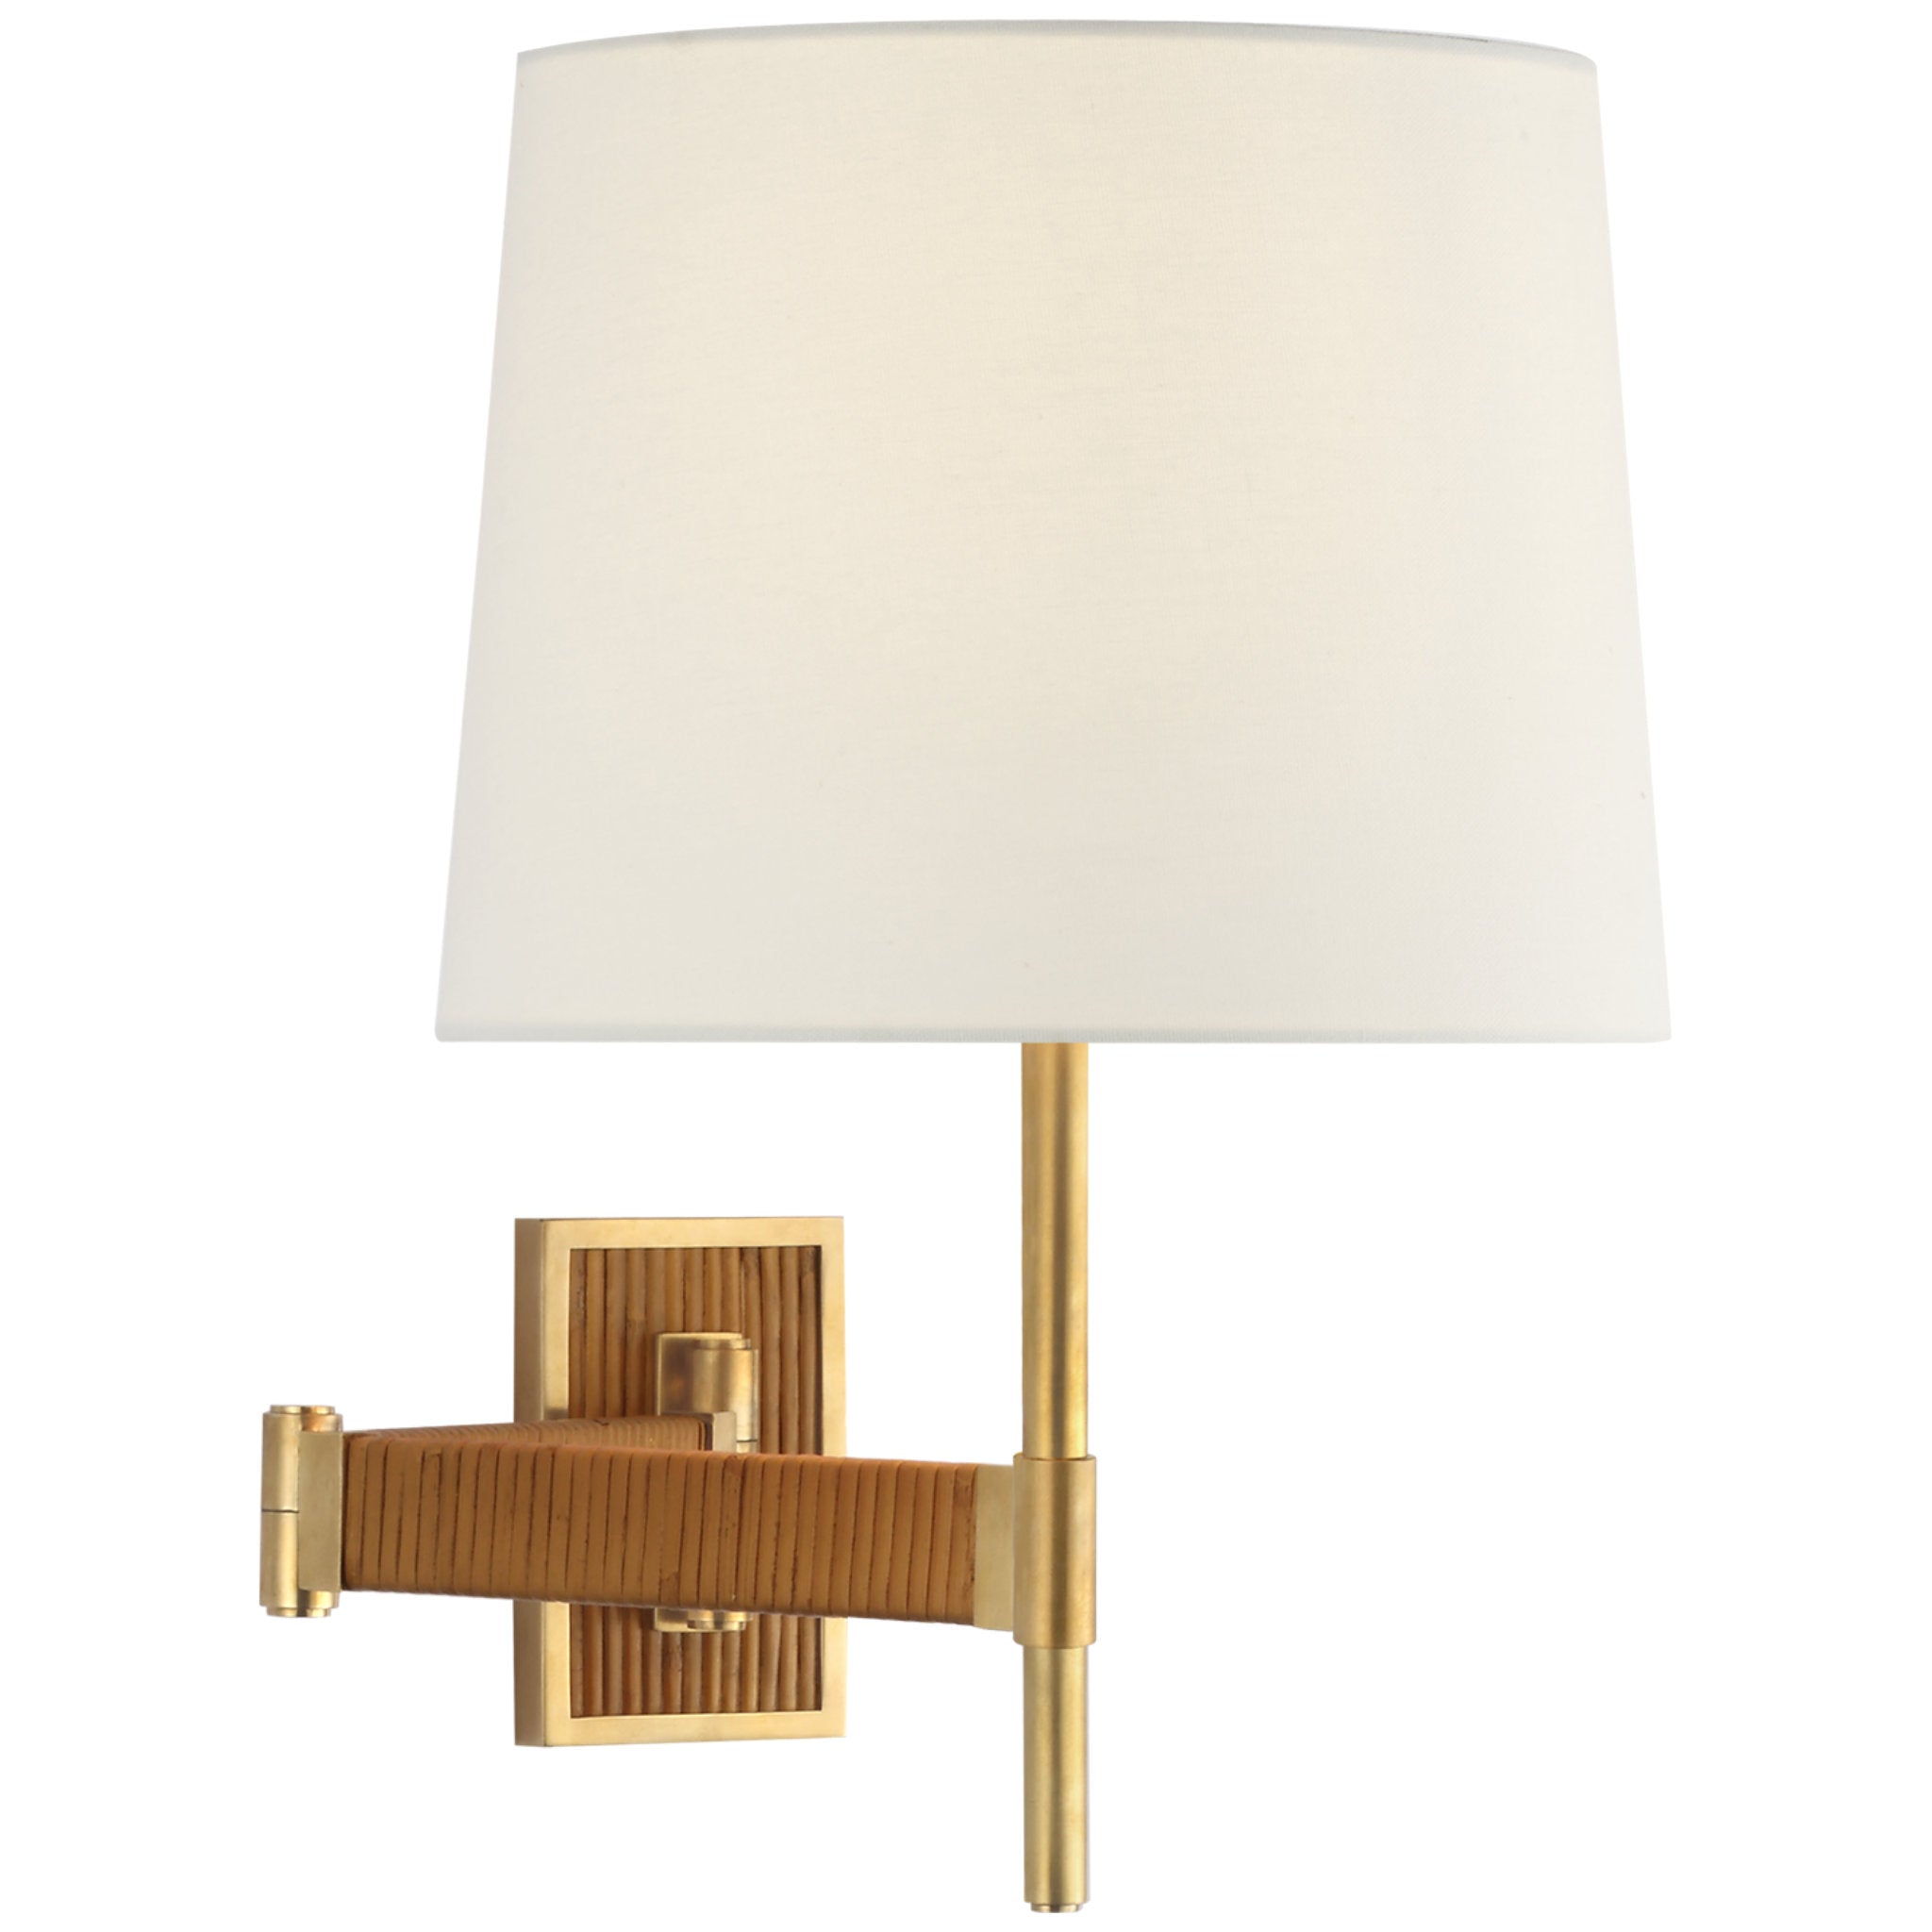 Suzanne Kasler Elle Swing Arm Sconce in Hand-Rubbed Antique Brass and Dark Rattan with Linen Shade